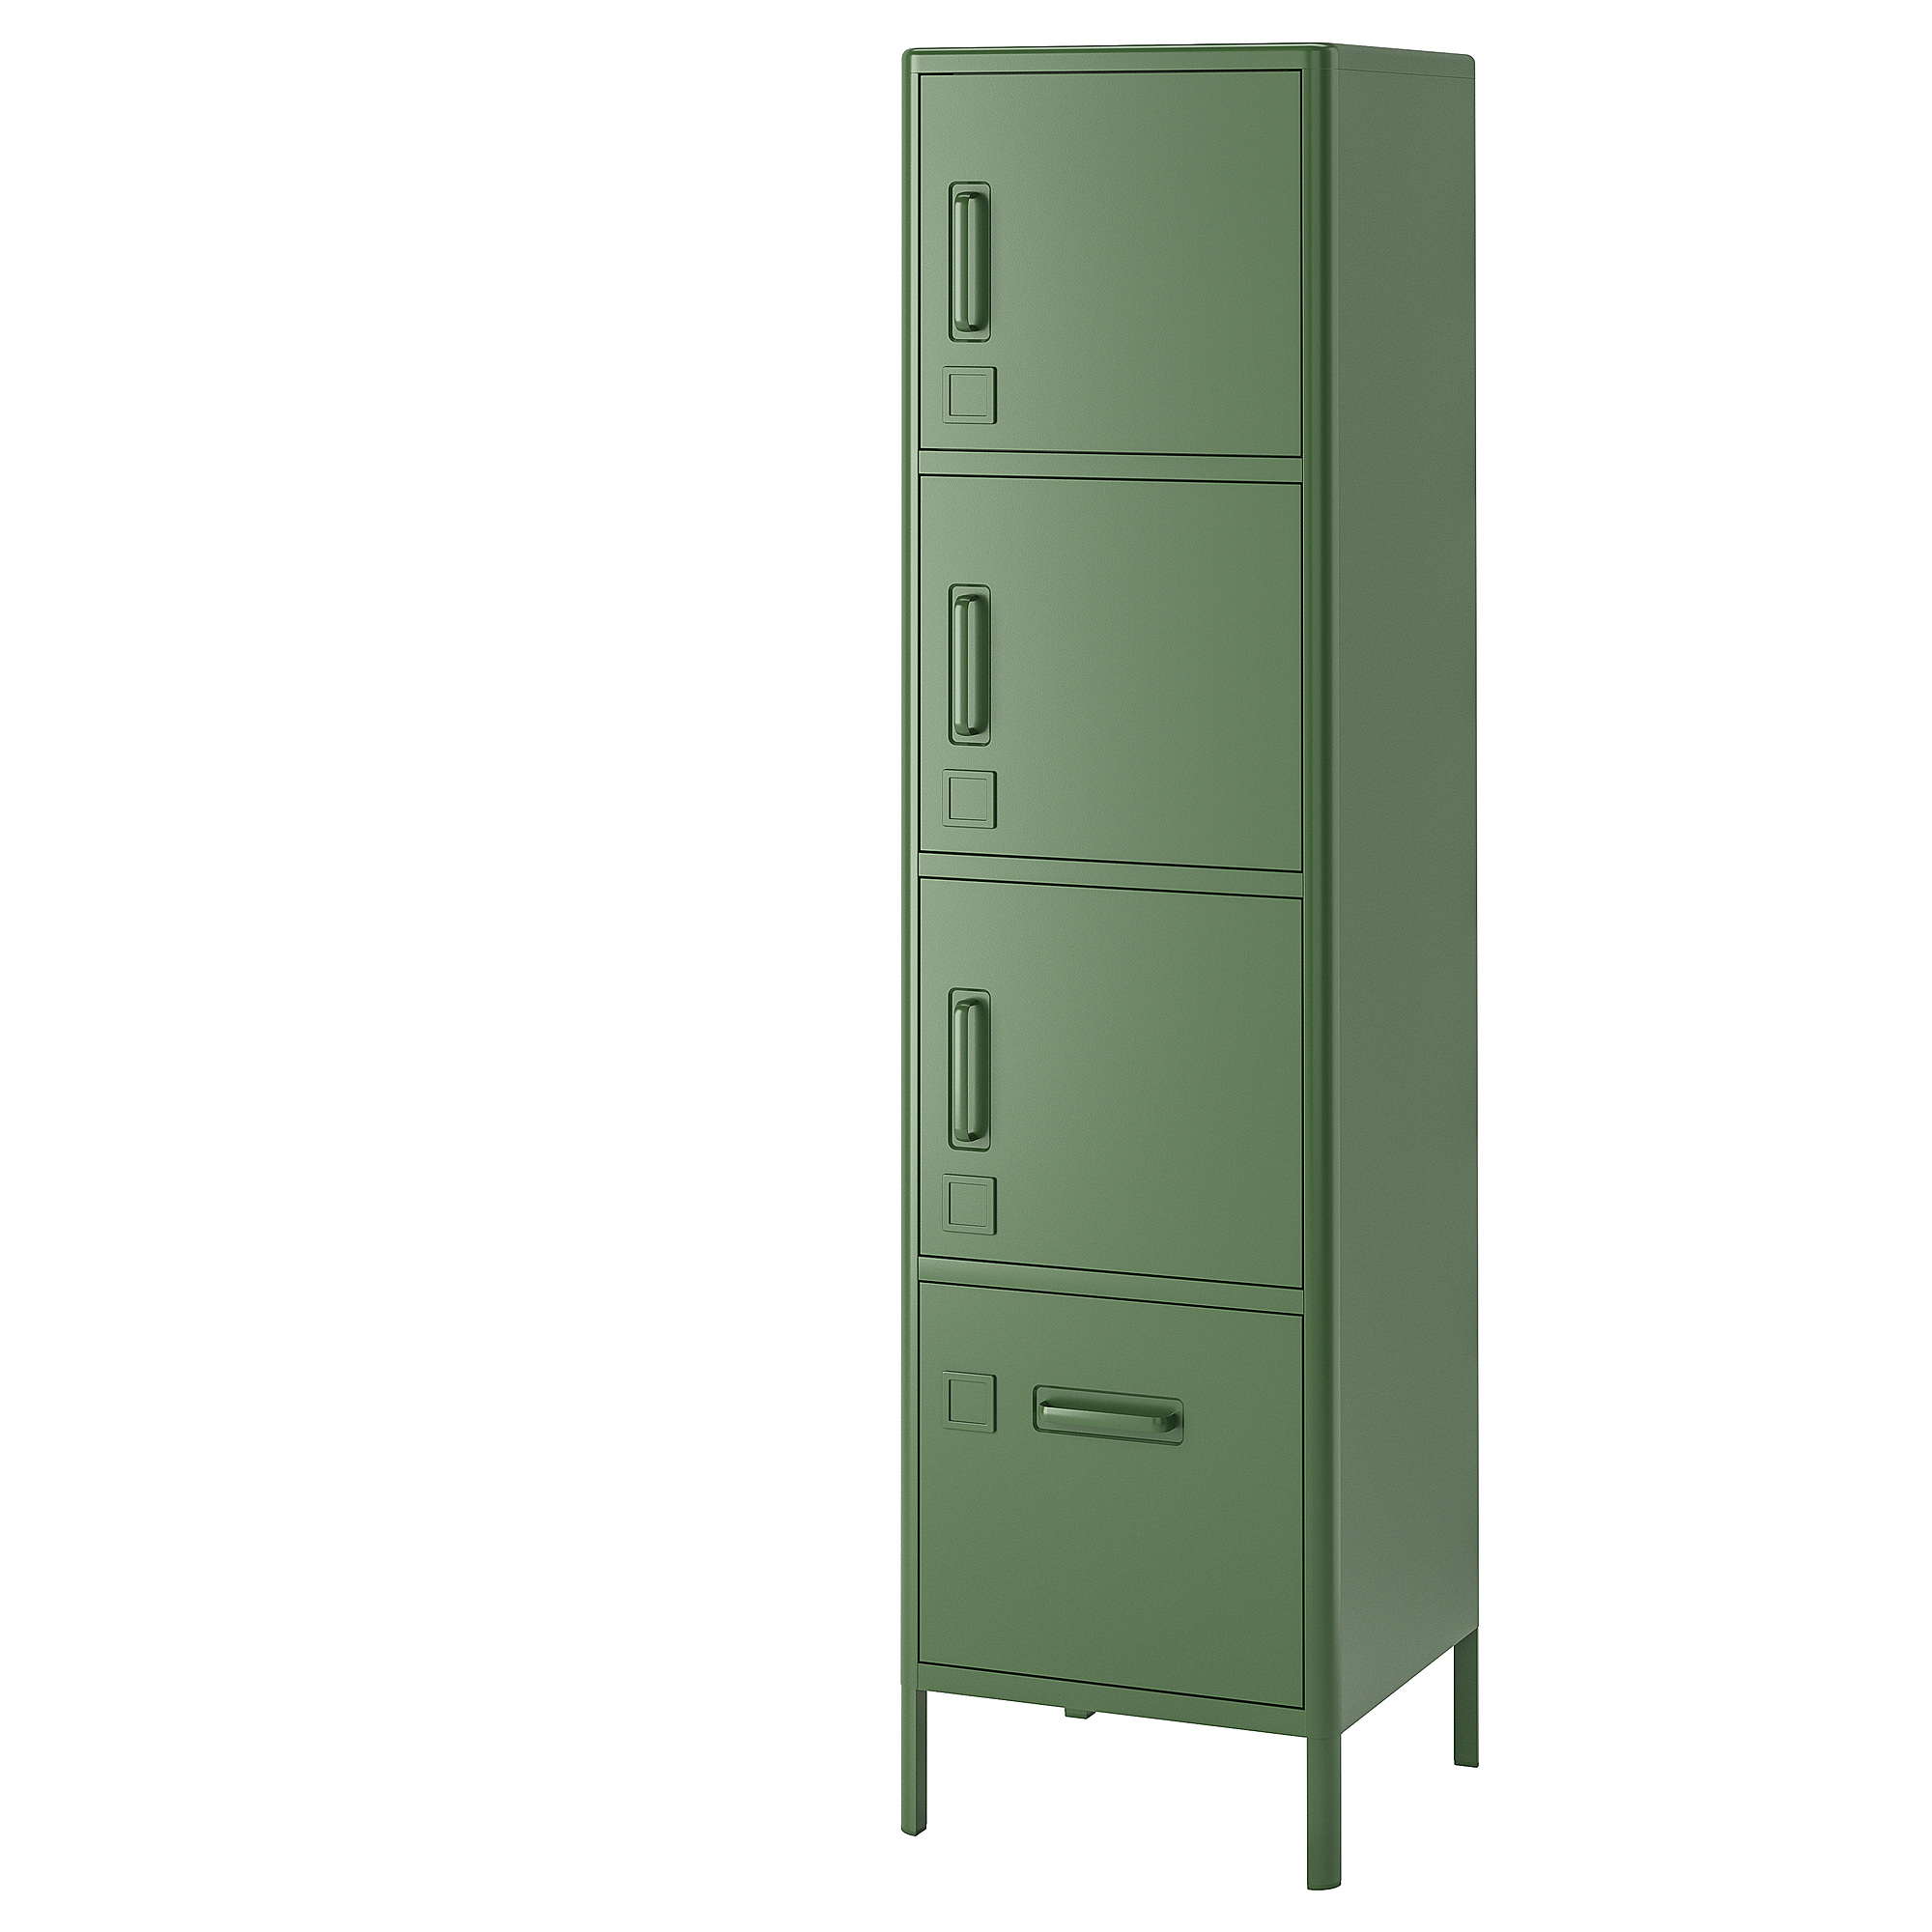 IDÅSEN high cabinet with drawer and doors